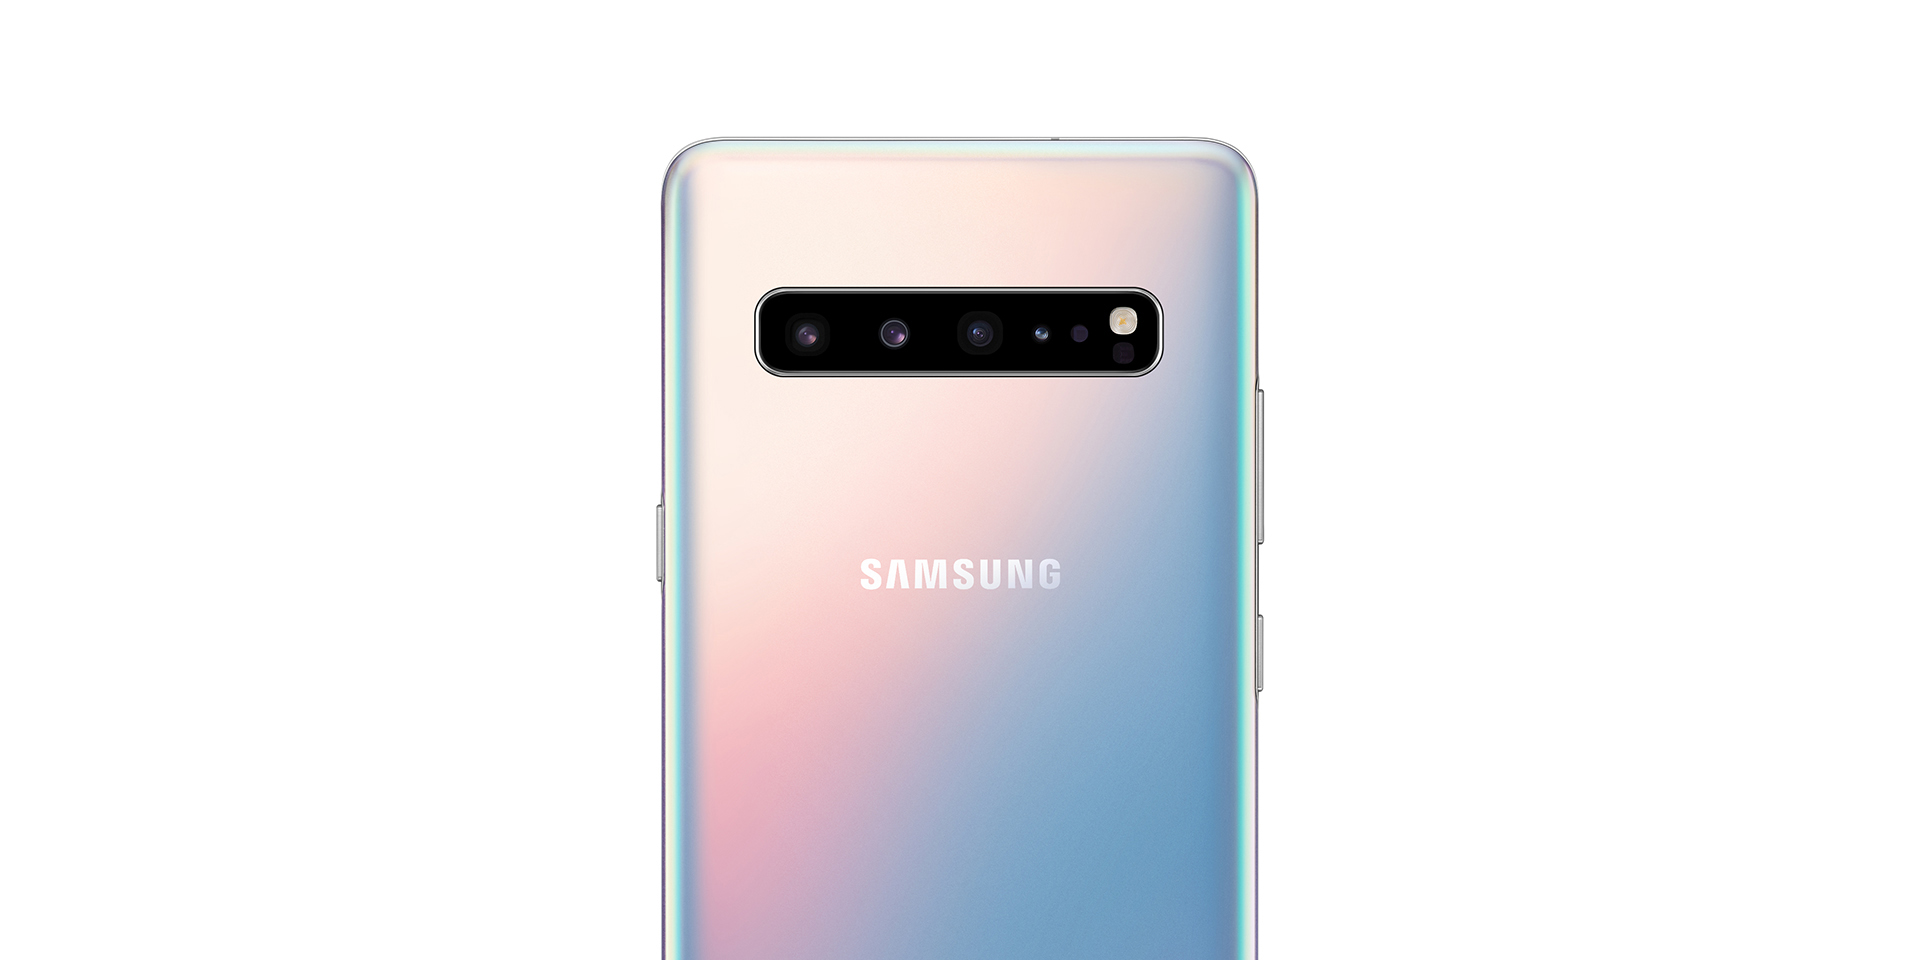 Galaxy S10 5G price, pre-orders, and 5G Note 10 confirmed - 9to5Google1920 x 960